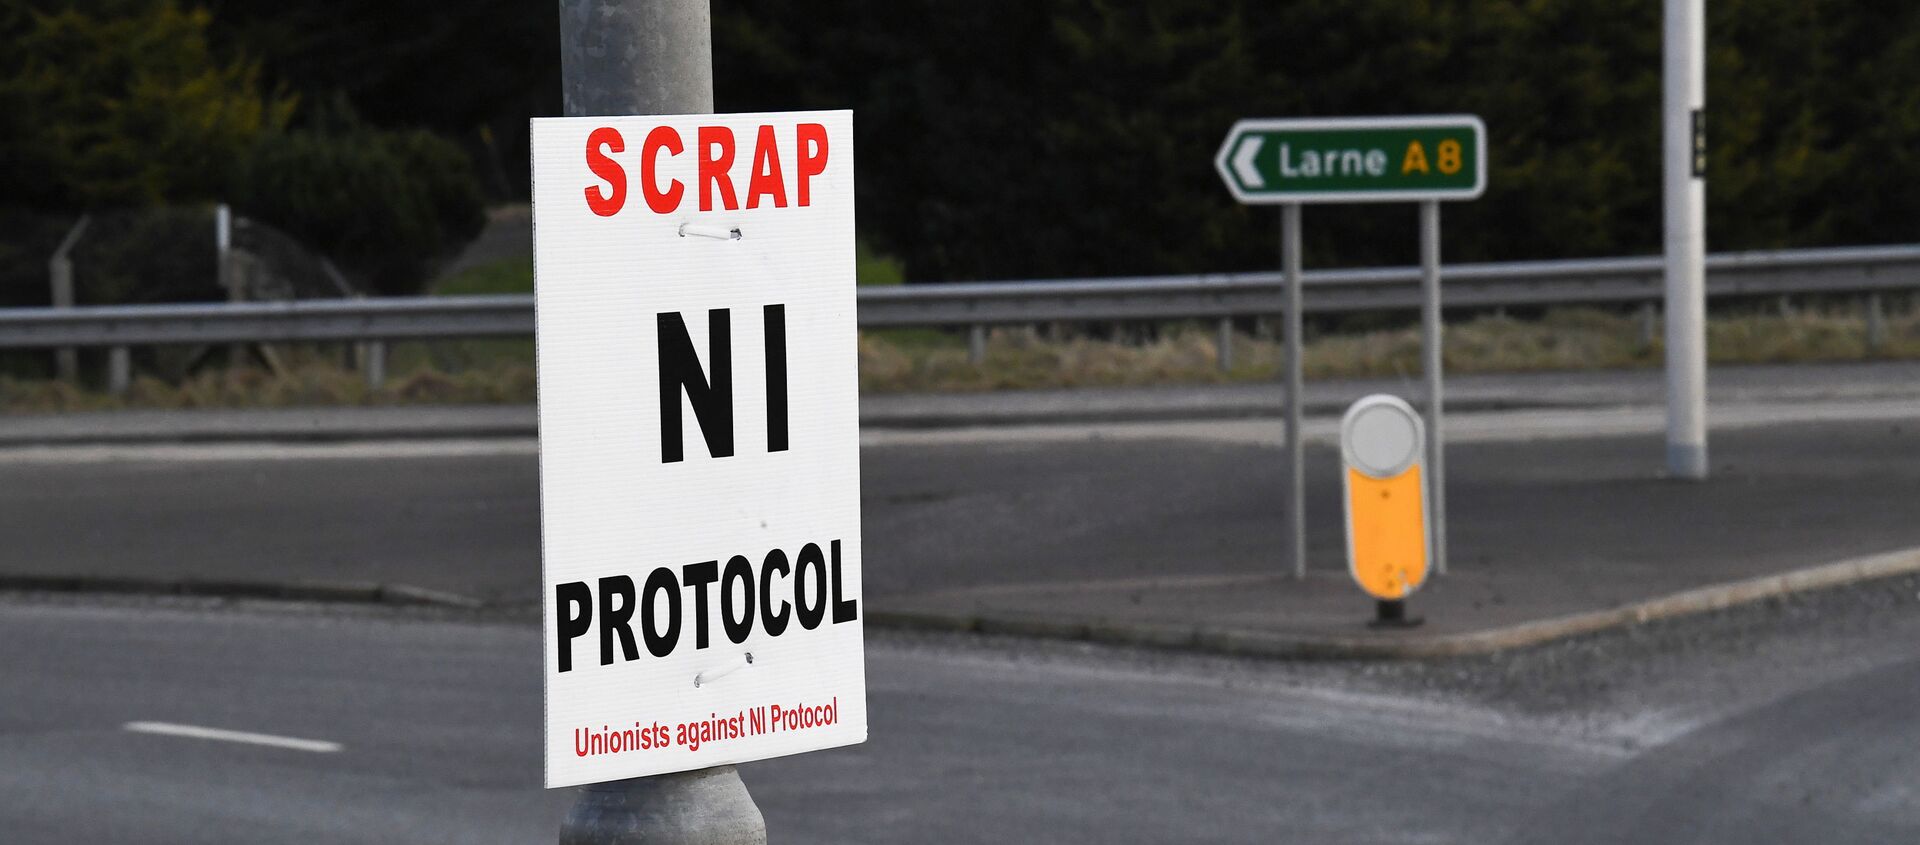 A sign is seen with a message against the Brexit border checks in relation to the Northern Ireland protocol at the harbour in Larne, Northern Ireland February 12, 2021 - Sputnik International, 1920, 05.03.2021